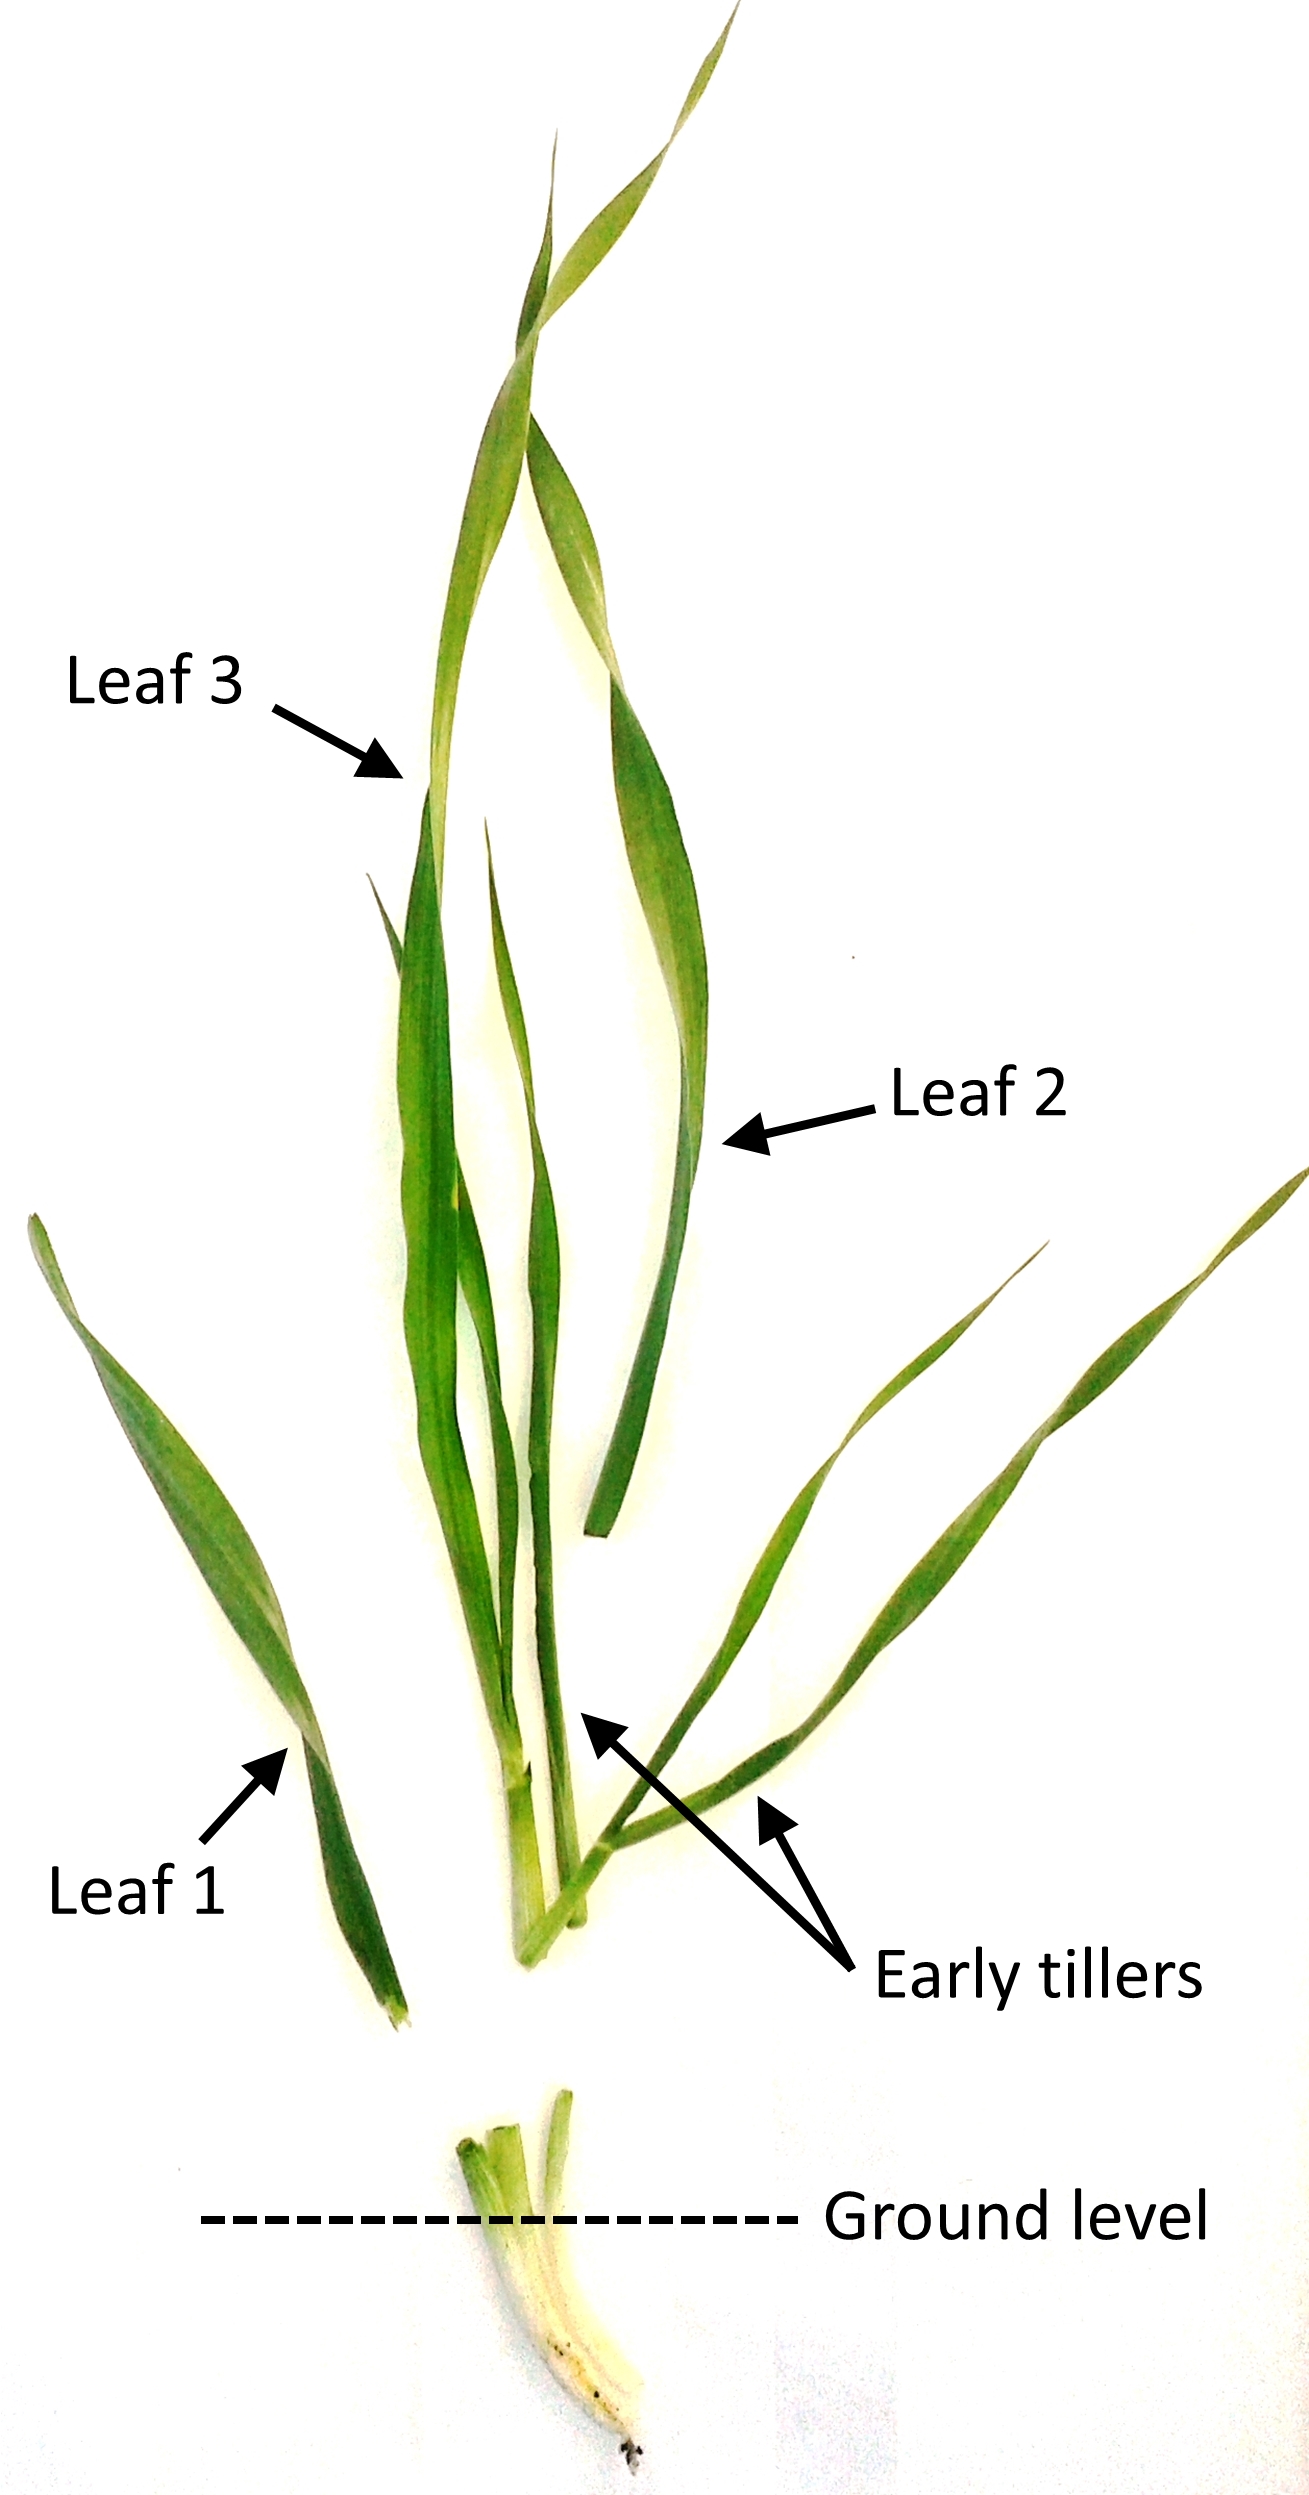 Figure 1. Component traits of early vigour in barley. Featured plant was sampled 25 days after sowing at the field trial conducted at Hermitage Research Facility, Warwick, Queensland. Early tillers emerged in the axils of leaf 1 and leaf 2.